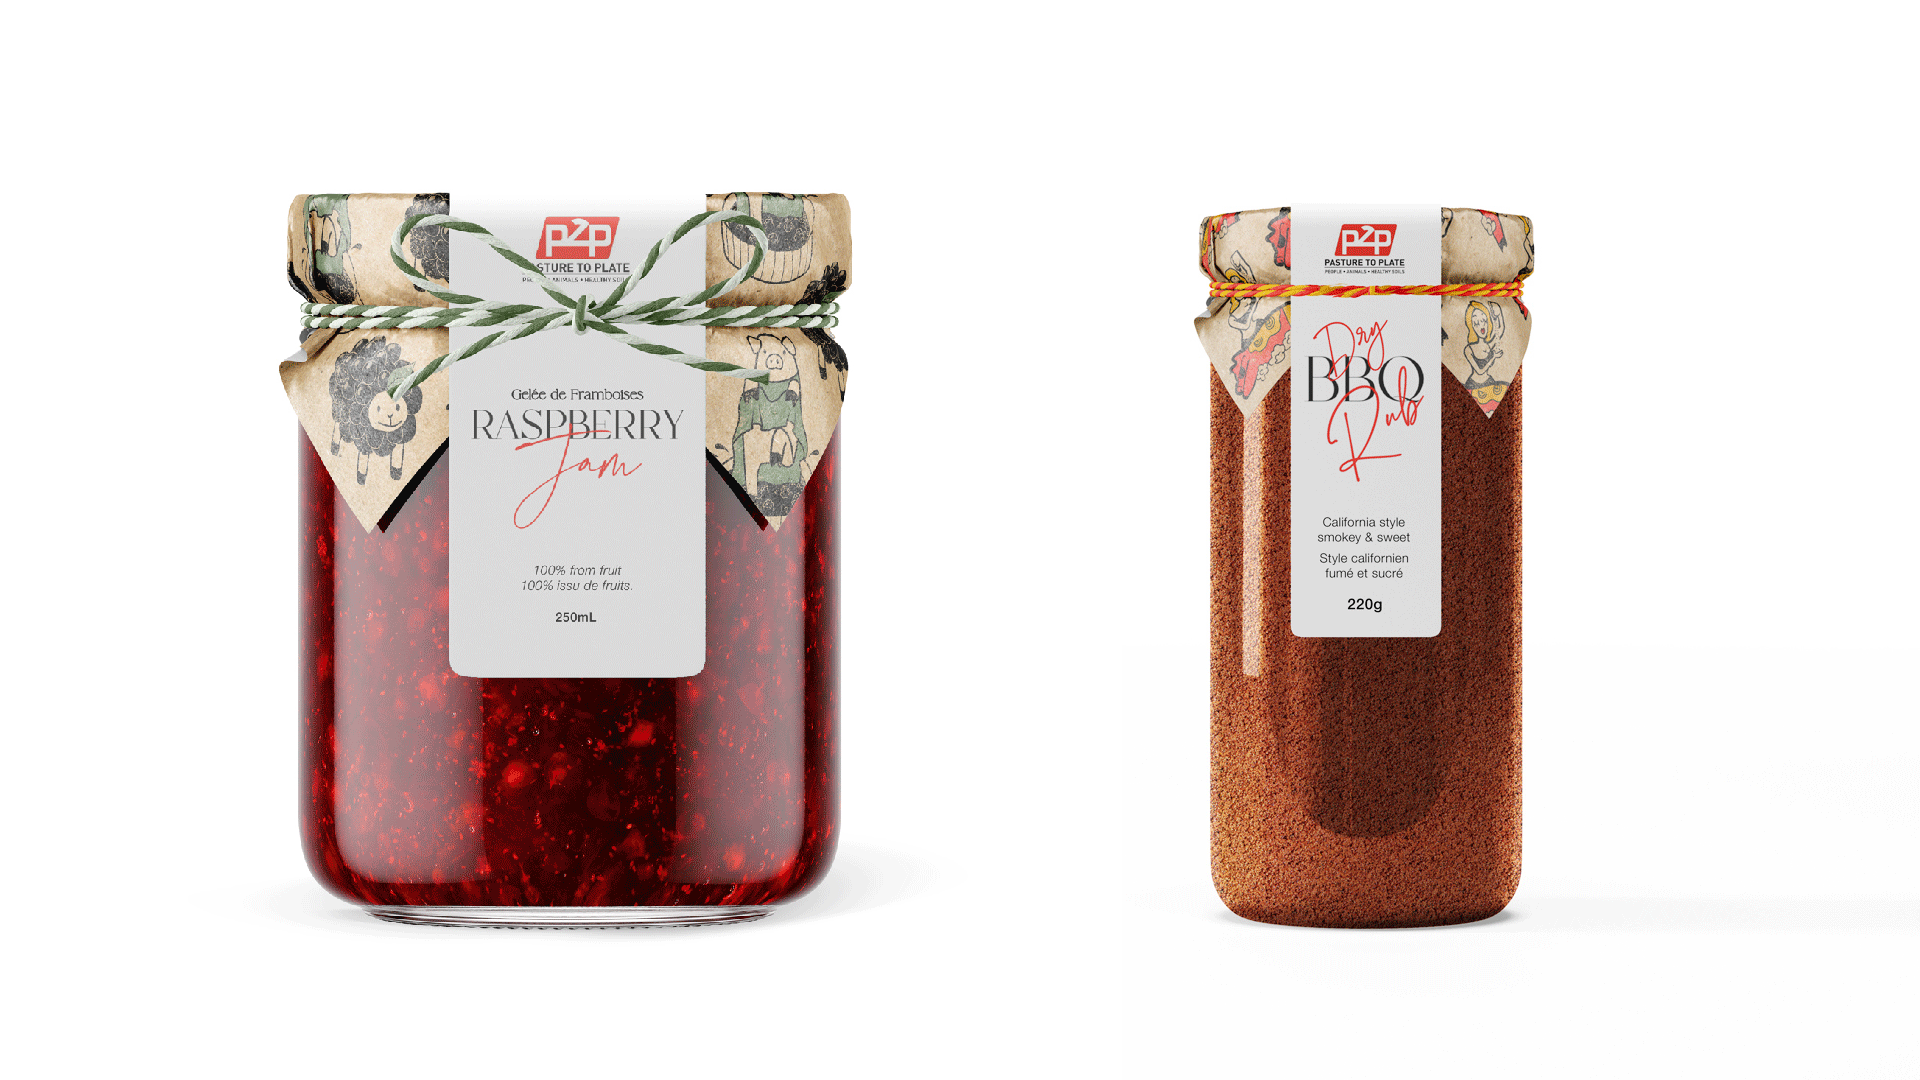 Pasta, jam, spice, baguette, and knife set packaging designed cohesively.